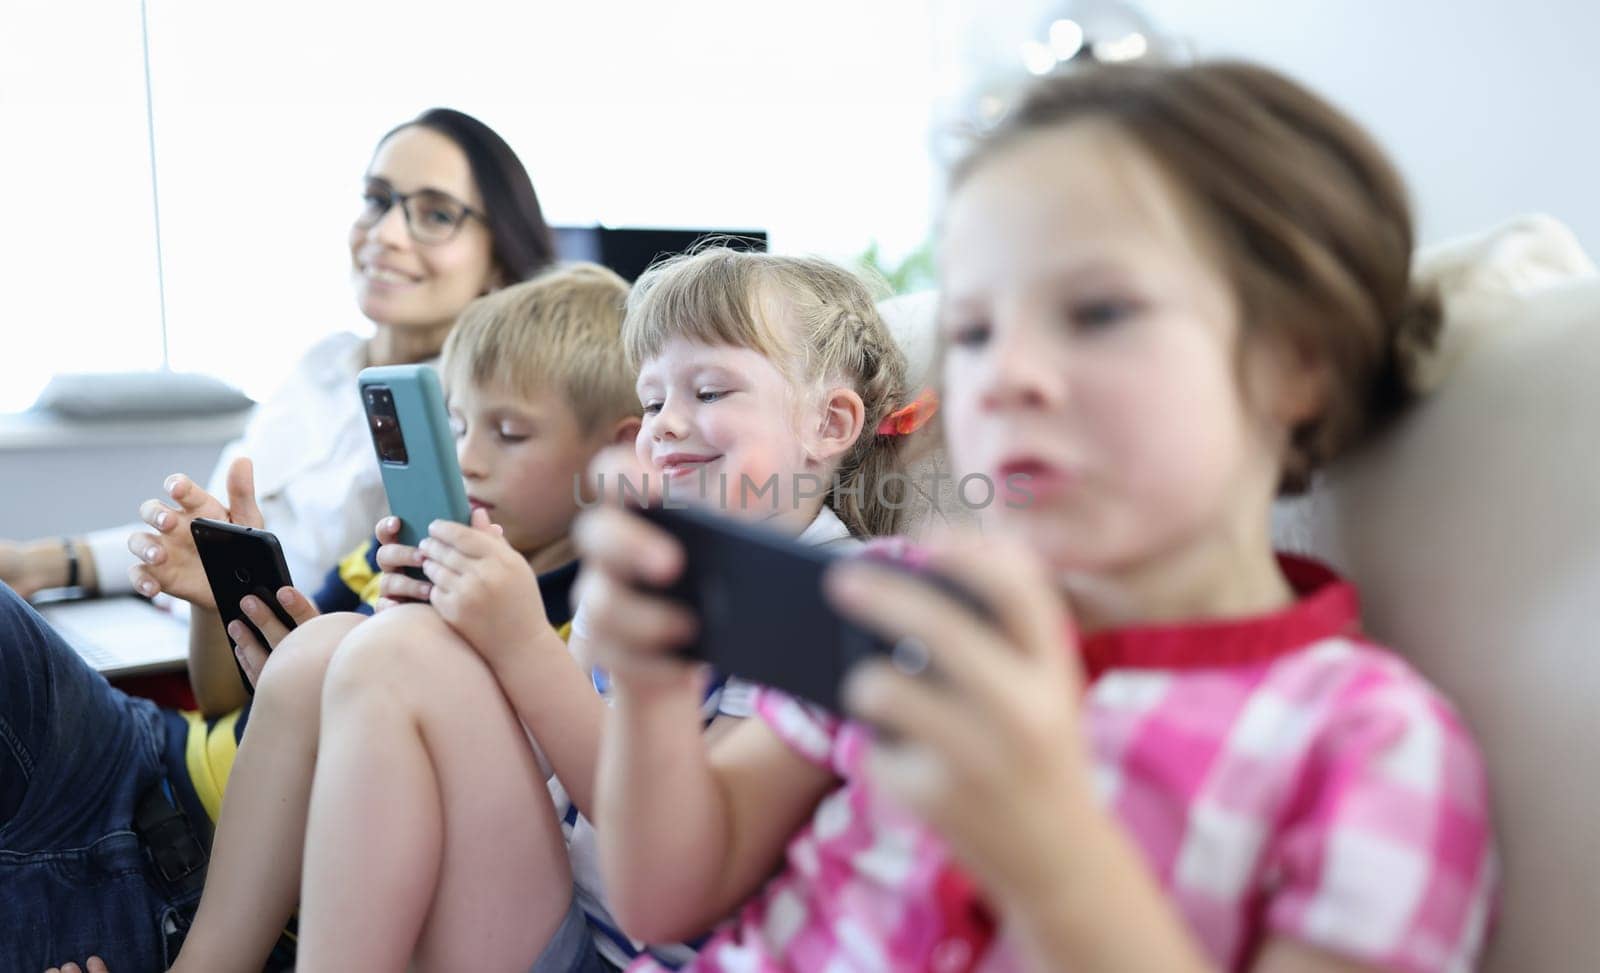 Three children sit side by side on couch and play on smartphones. Woman work at laptop next to children.